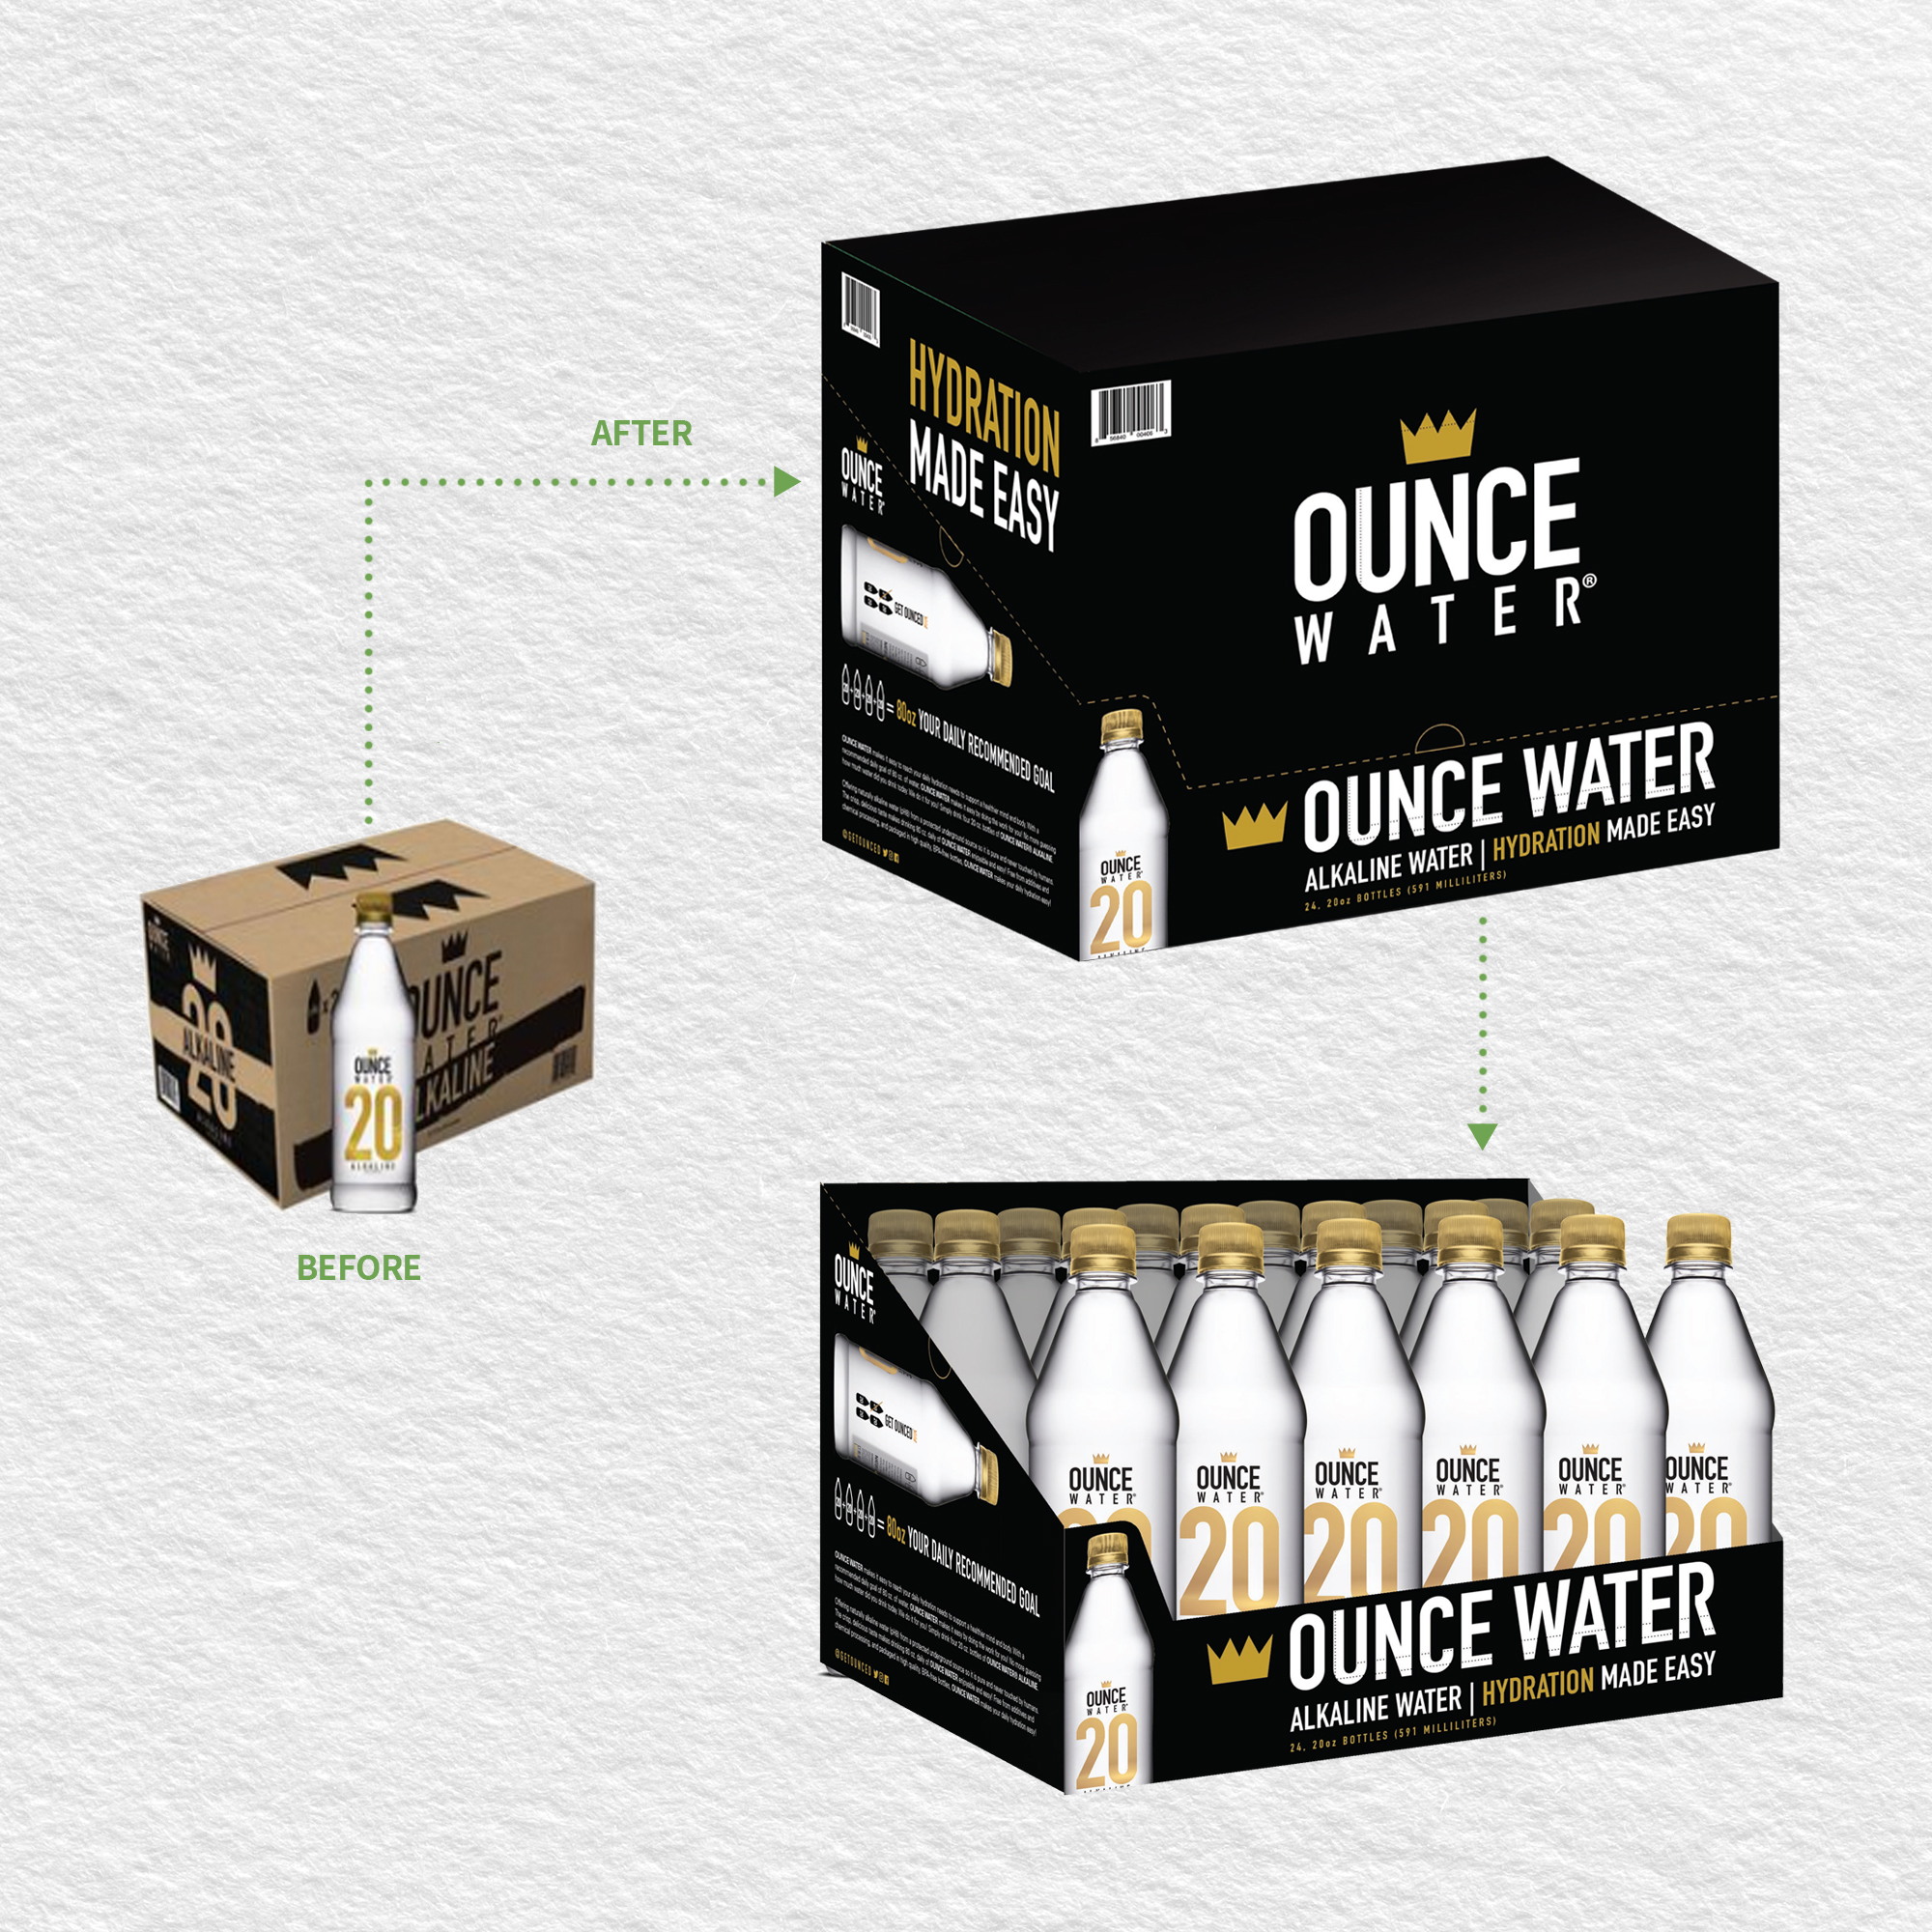 OUNCE Water success story before and after package images